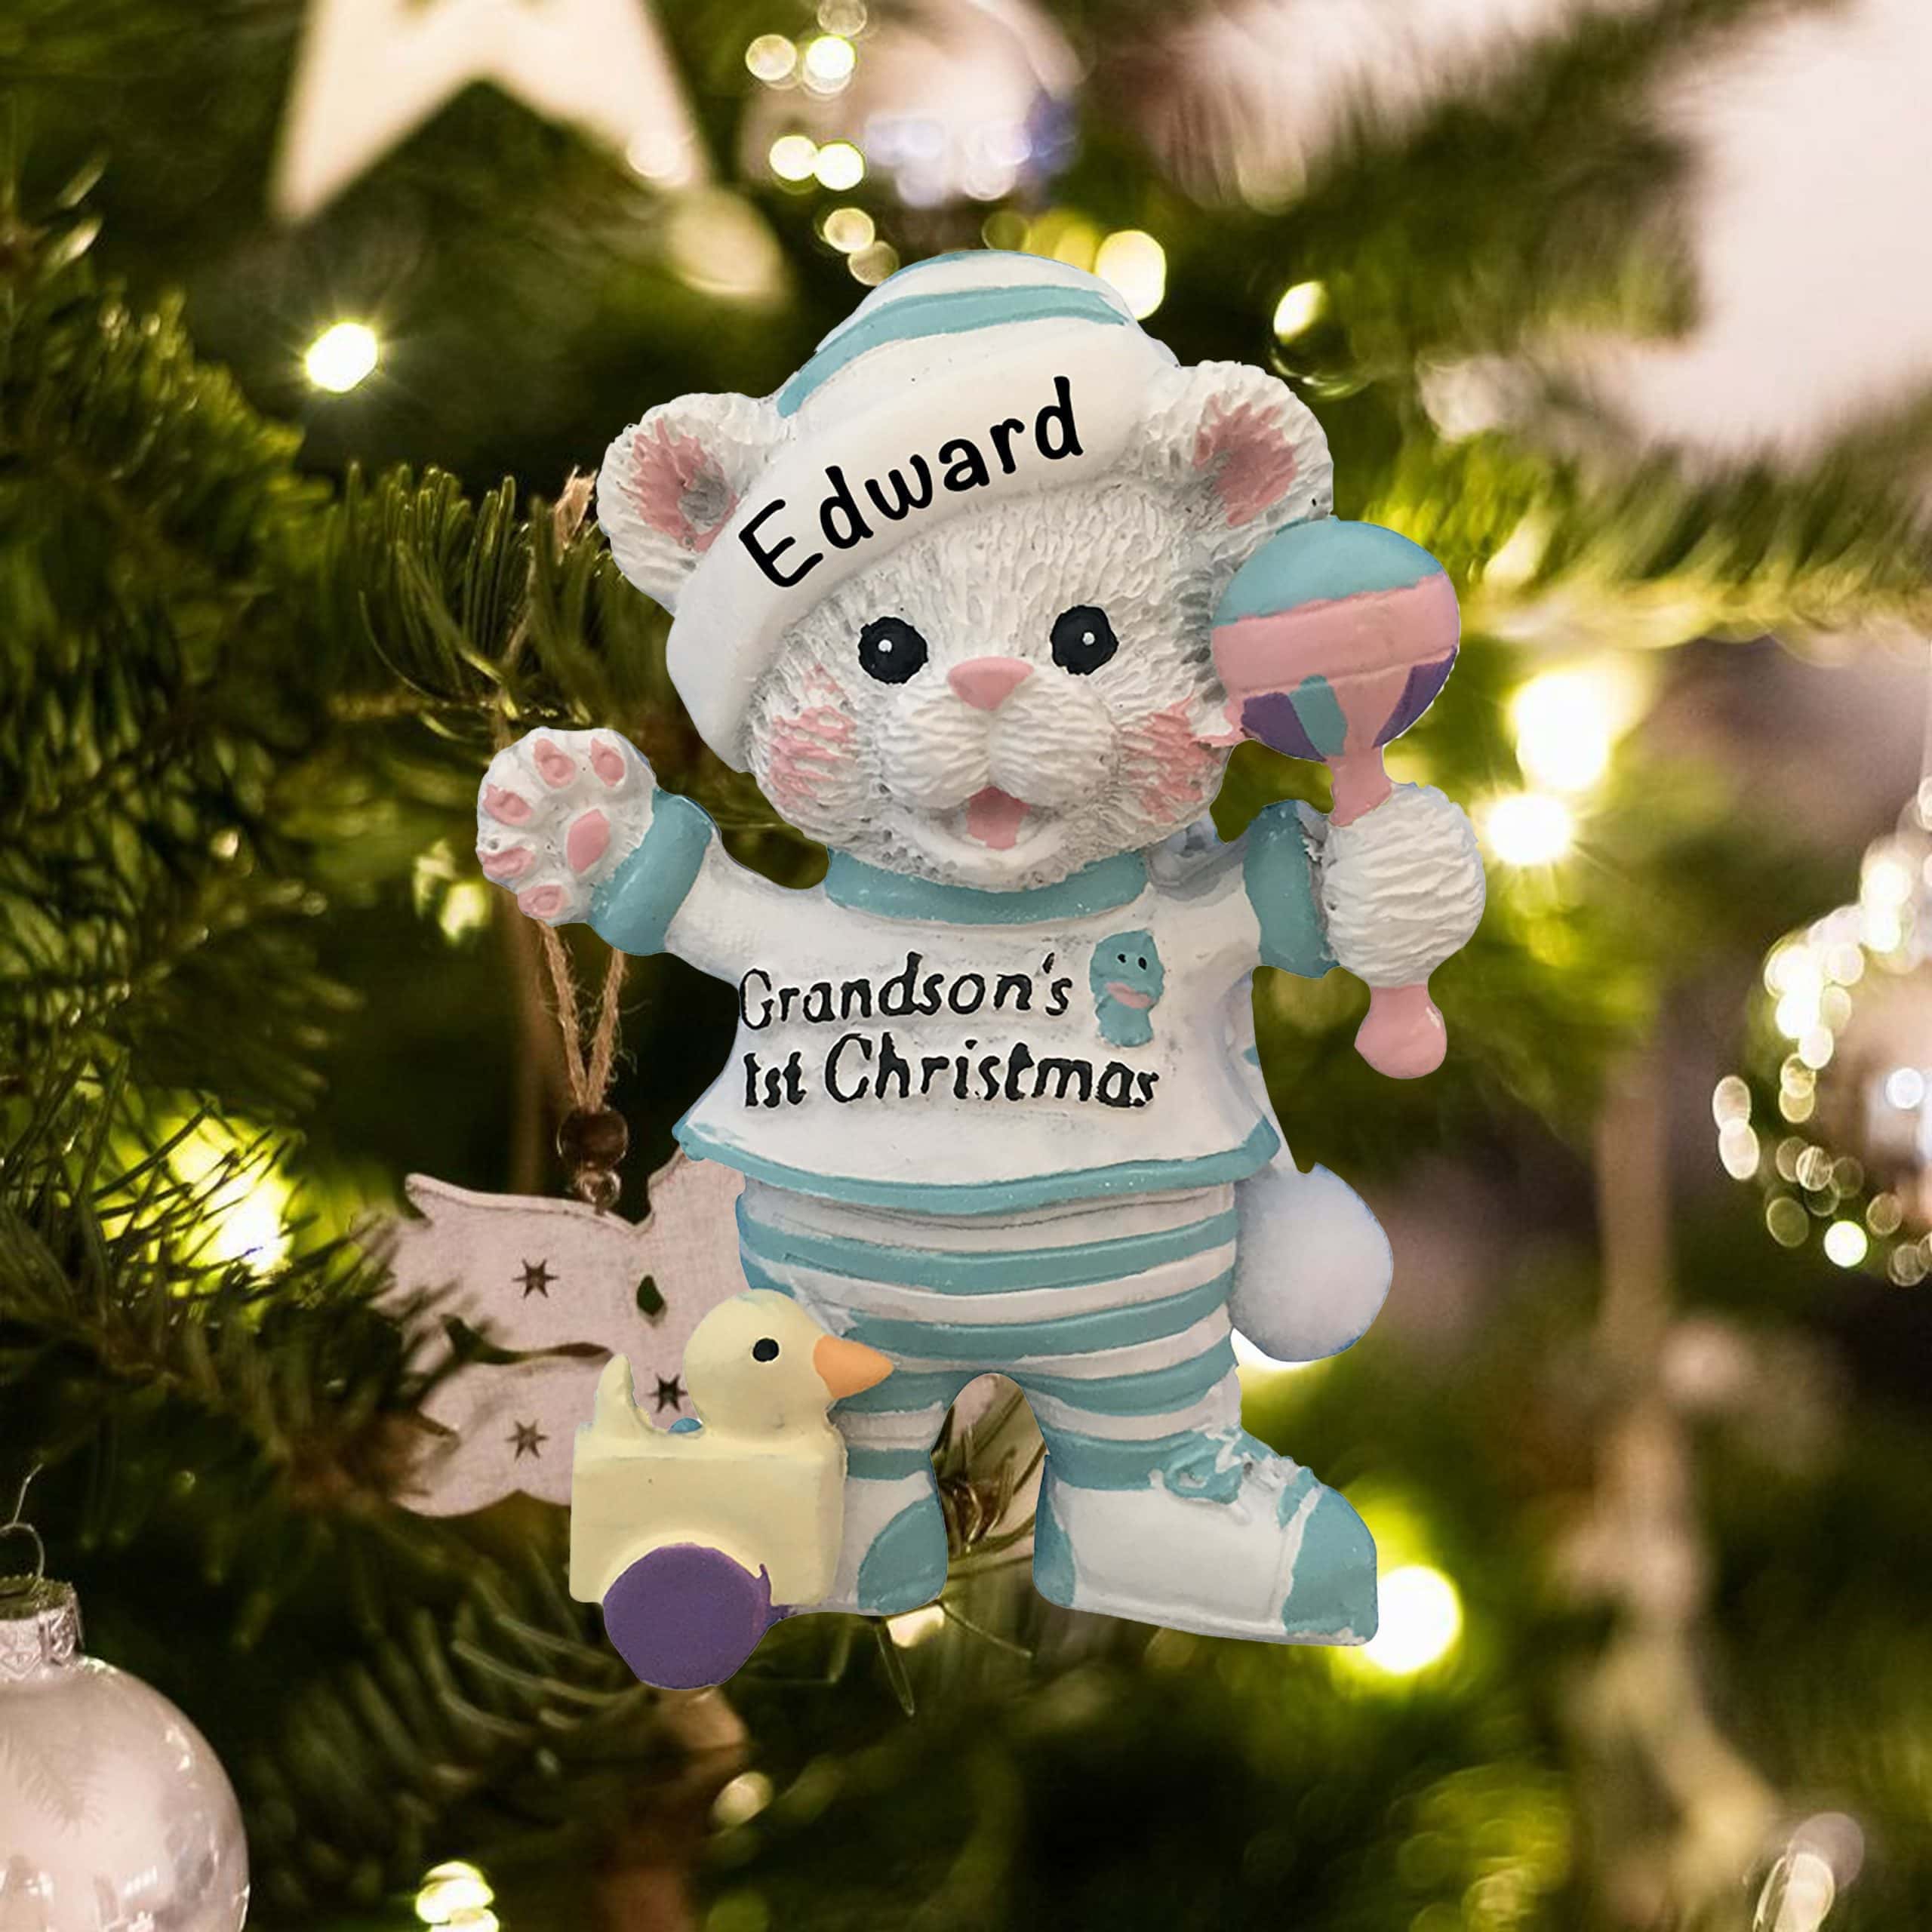 Grandson's 1st Christmas Personalized Ornament